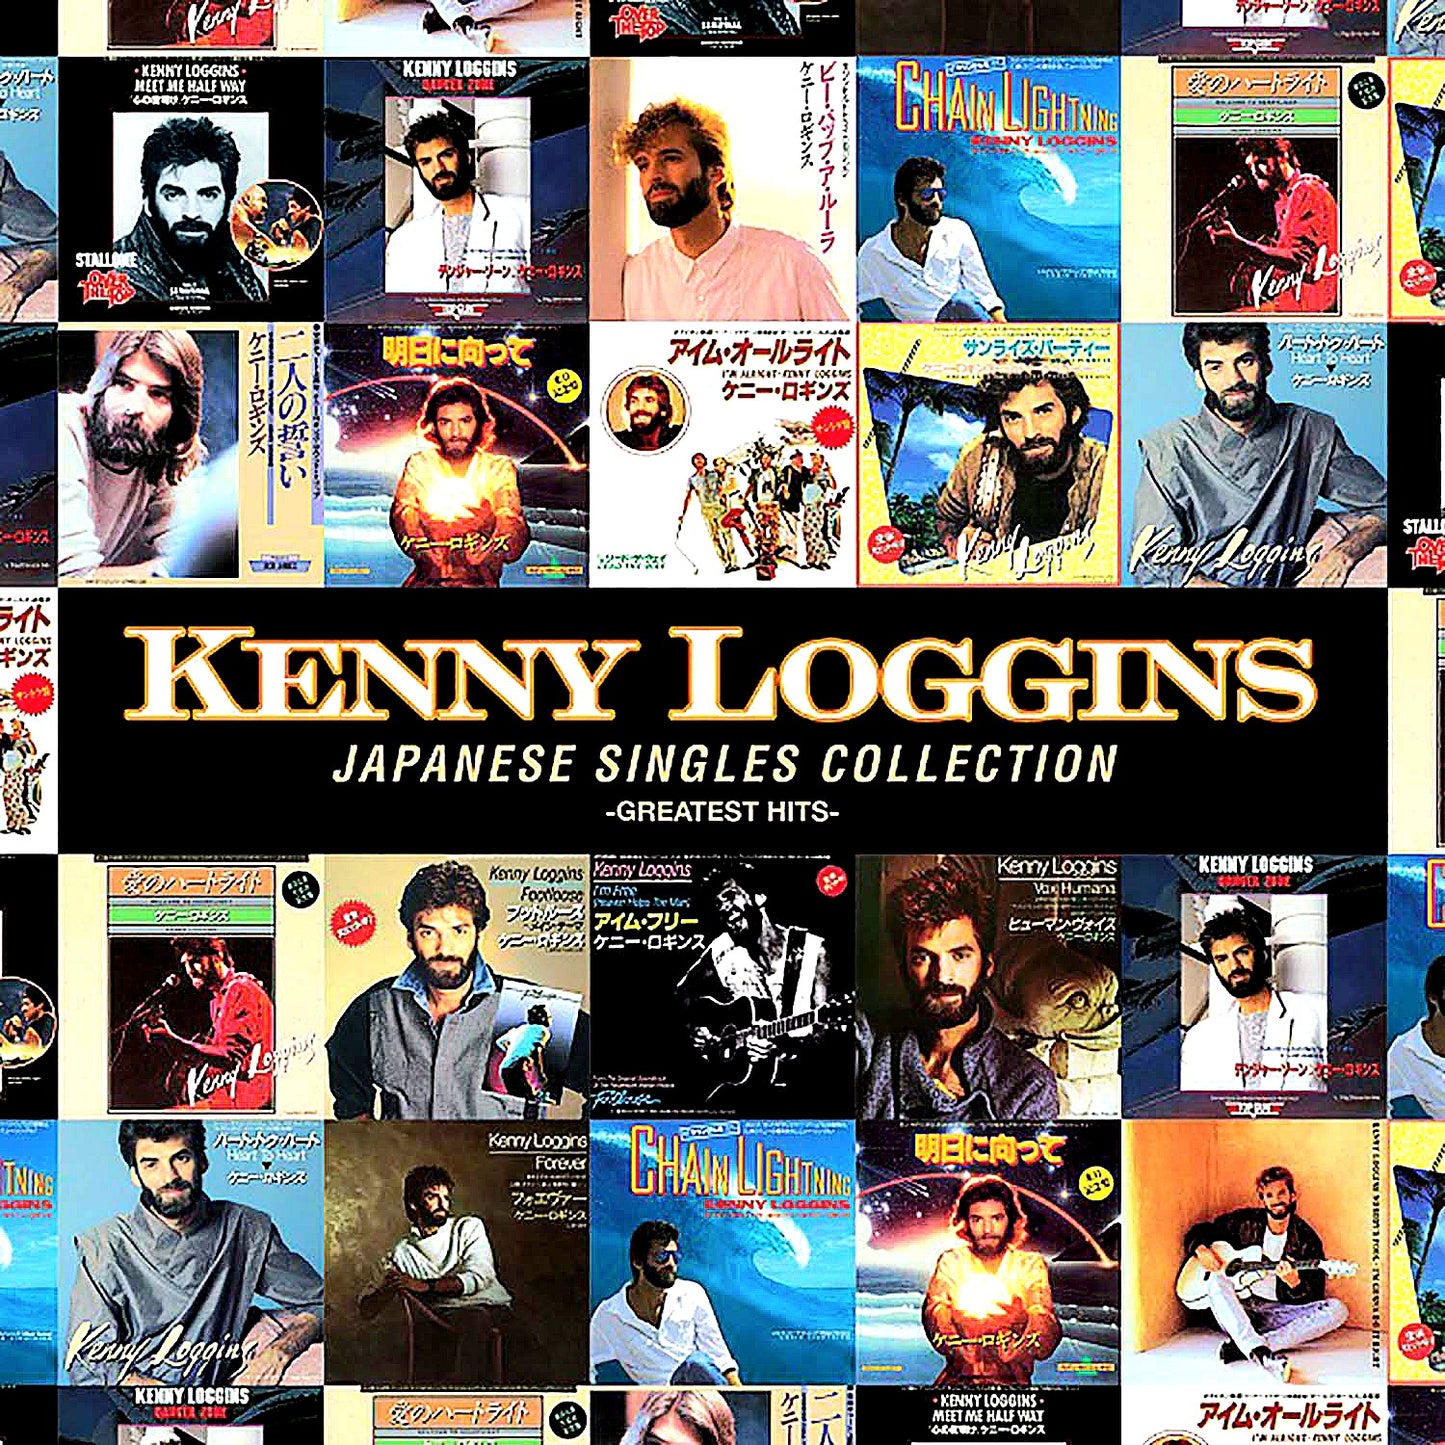 Kenny Loggins: Japanese Singles Collection CD & DVD